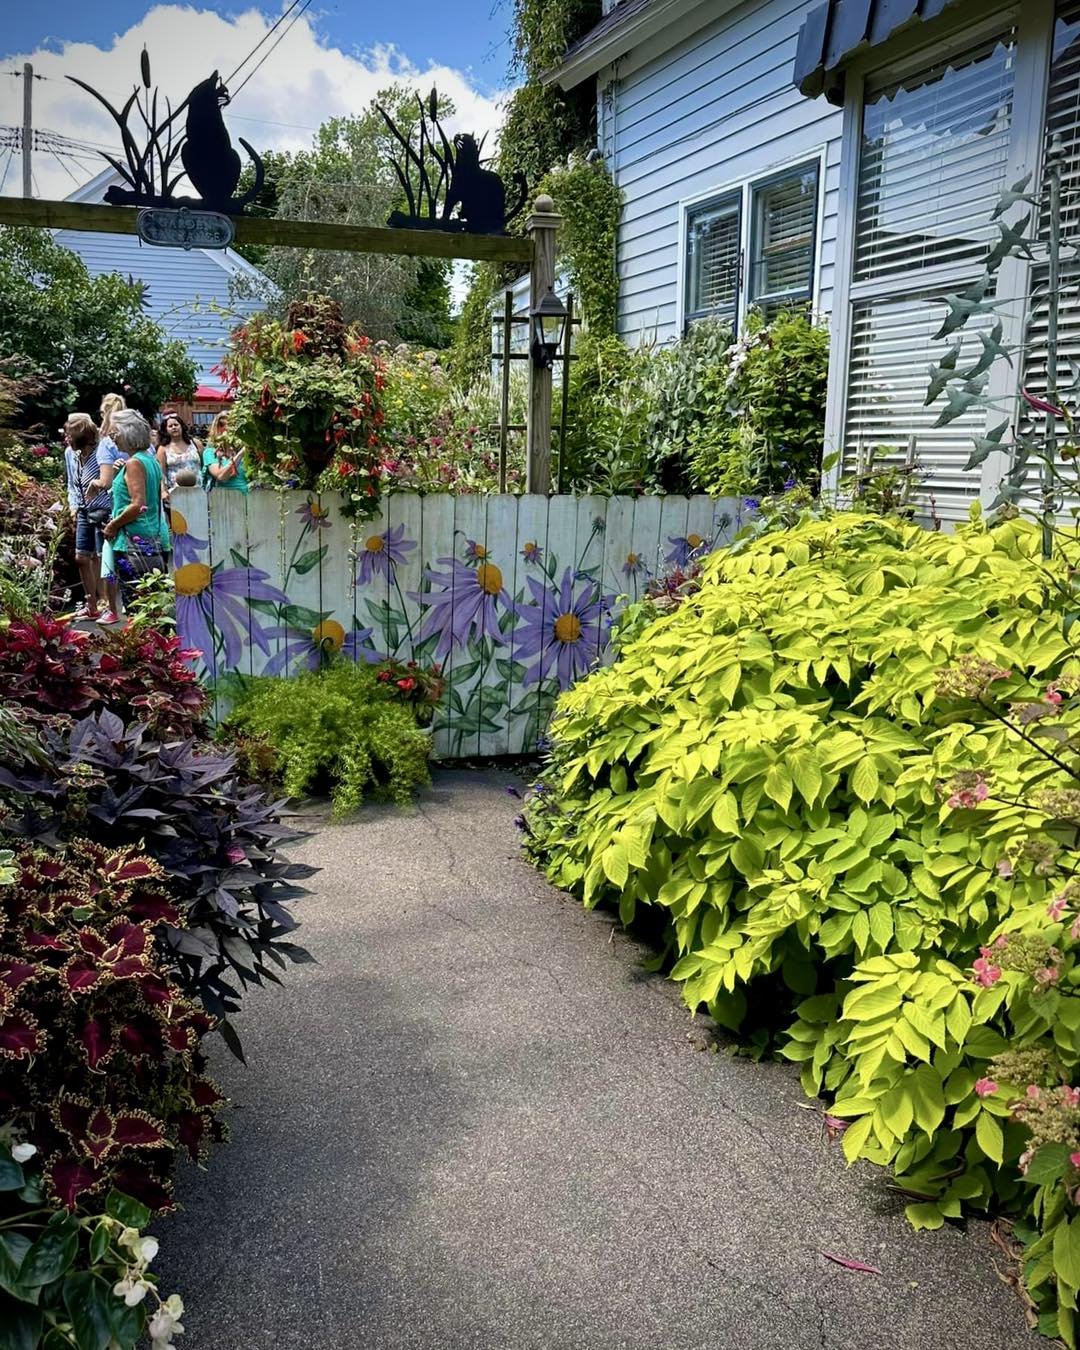 Although it's only May, we've already received numerous inquiries from so many out-of-town visitors. Registration closes in one week! Be part of the highly anticipated summer highlight, sign up your garden at GardenWalkBuffalo.com

(Photo courtesy of